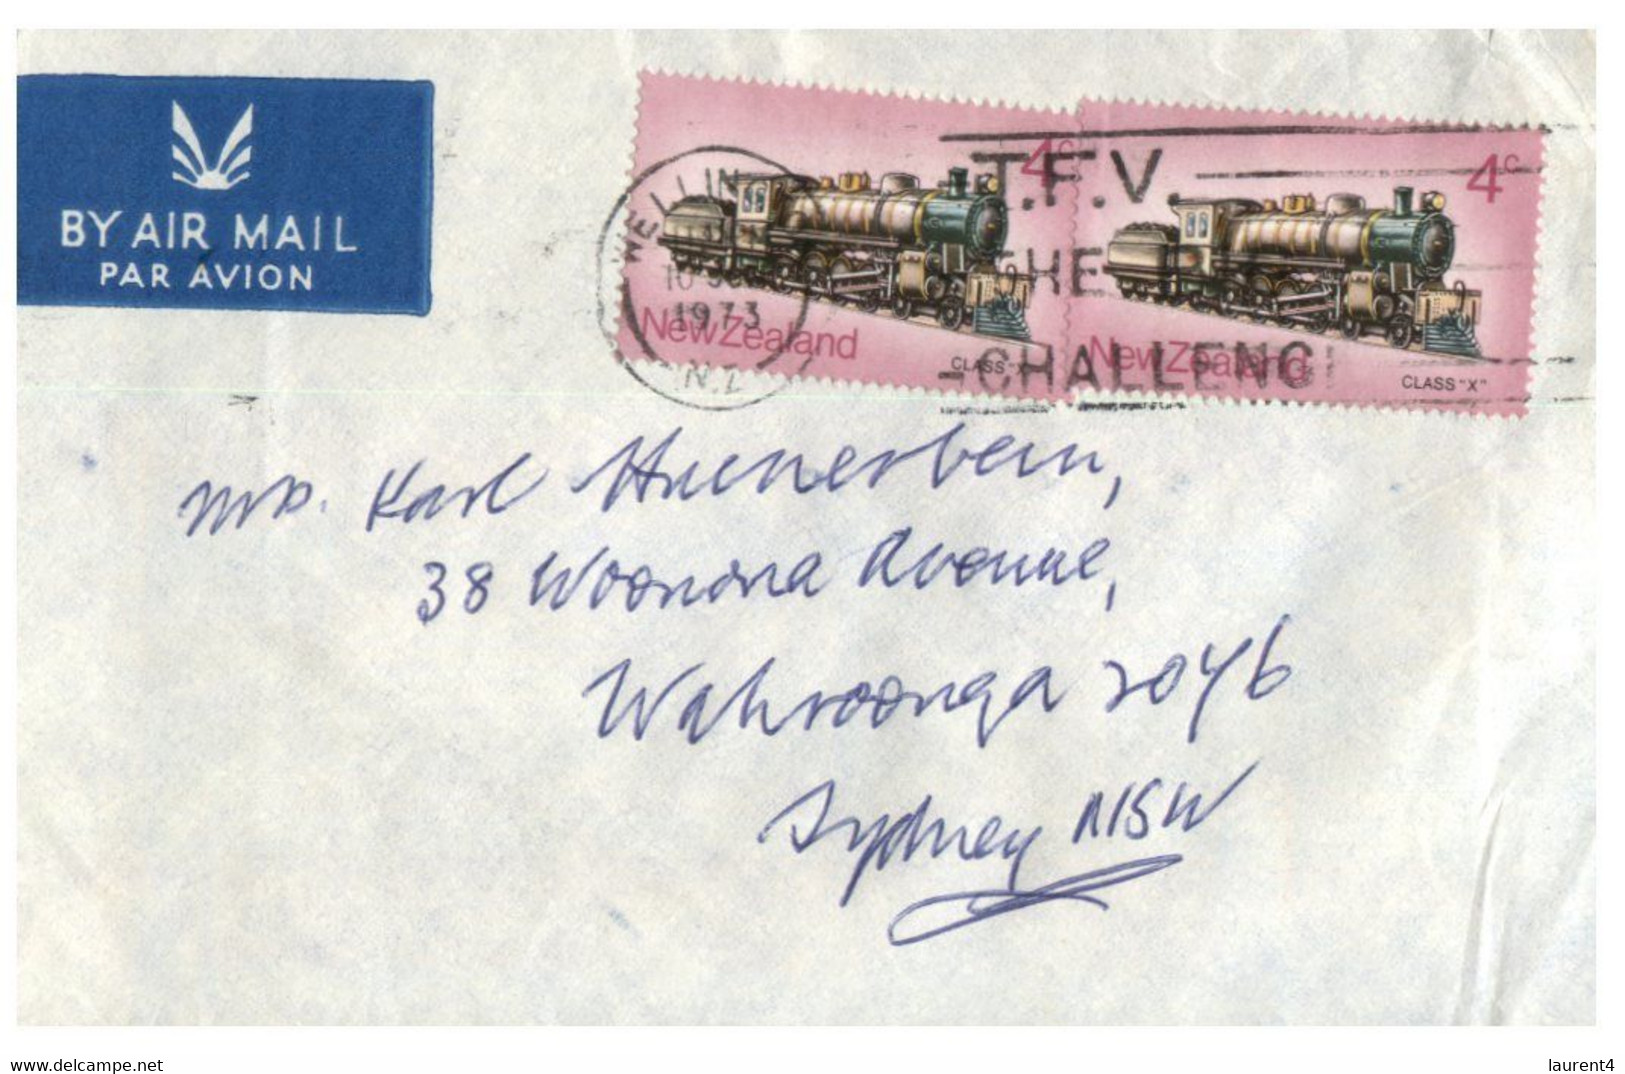 (HH 29) New Zealand Cover Posted To Australia - 1973 - Trains / Railway - Covers & Documents